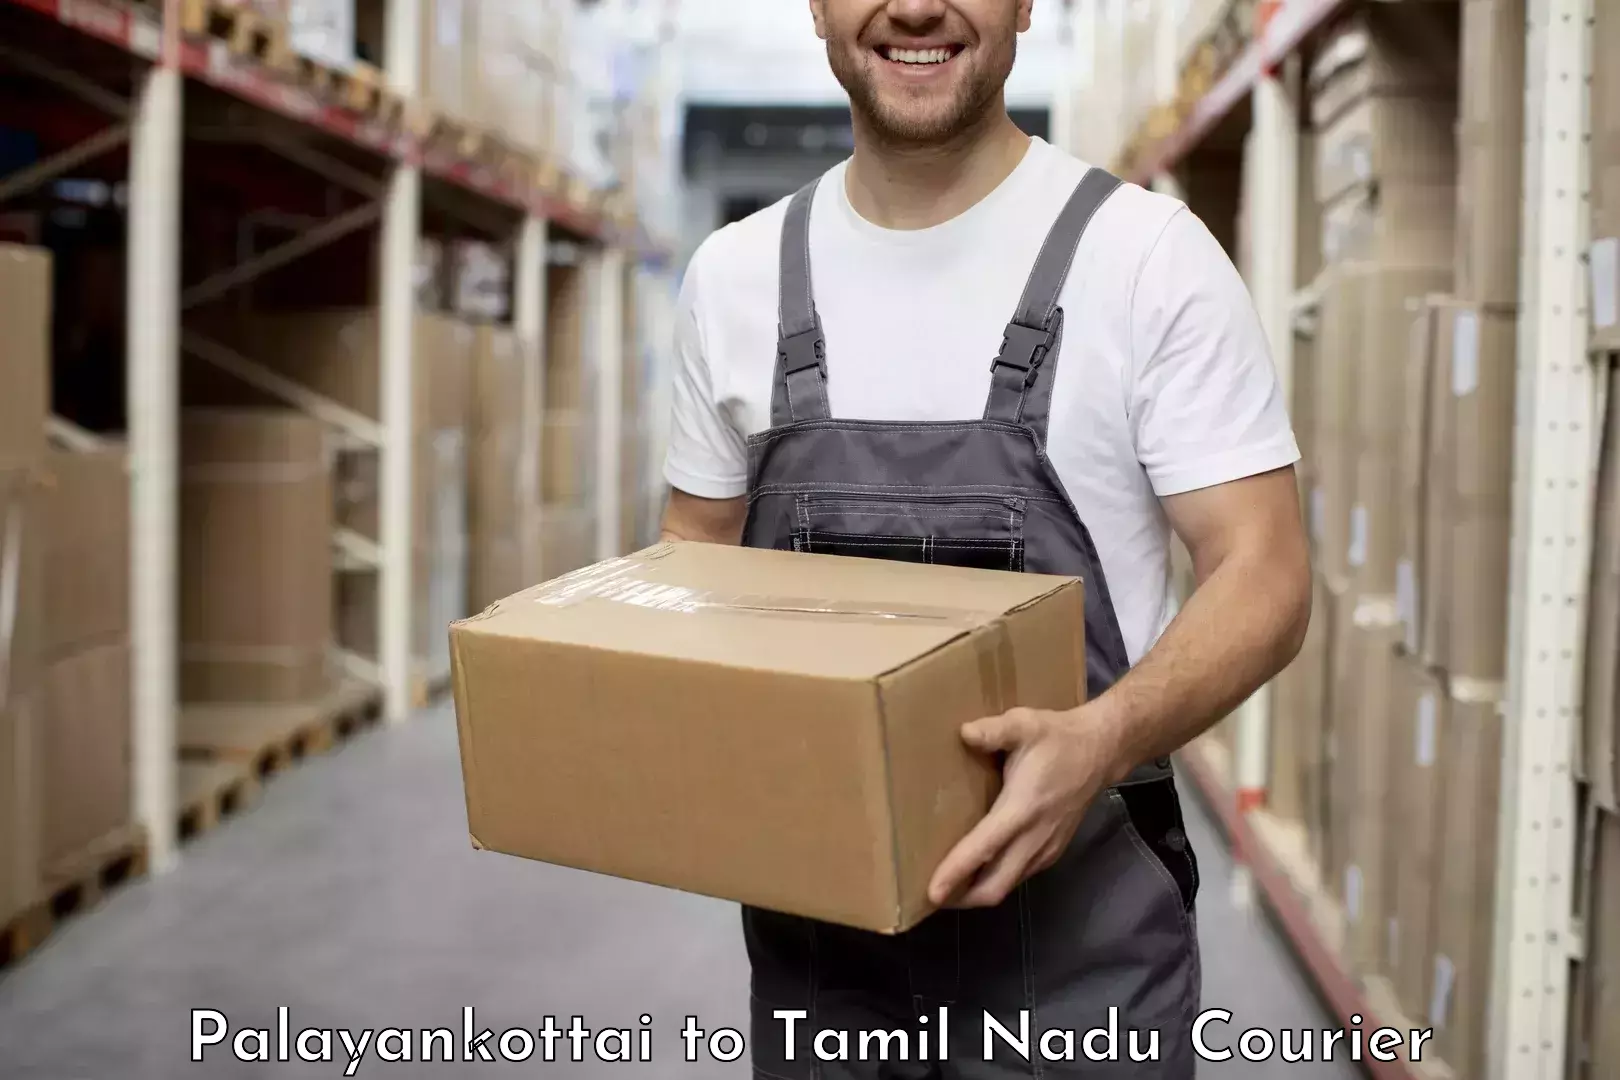 Flexible delivery scheduling Palayankottai to Kotagiri